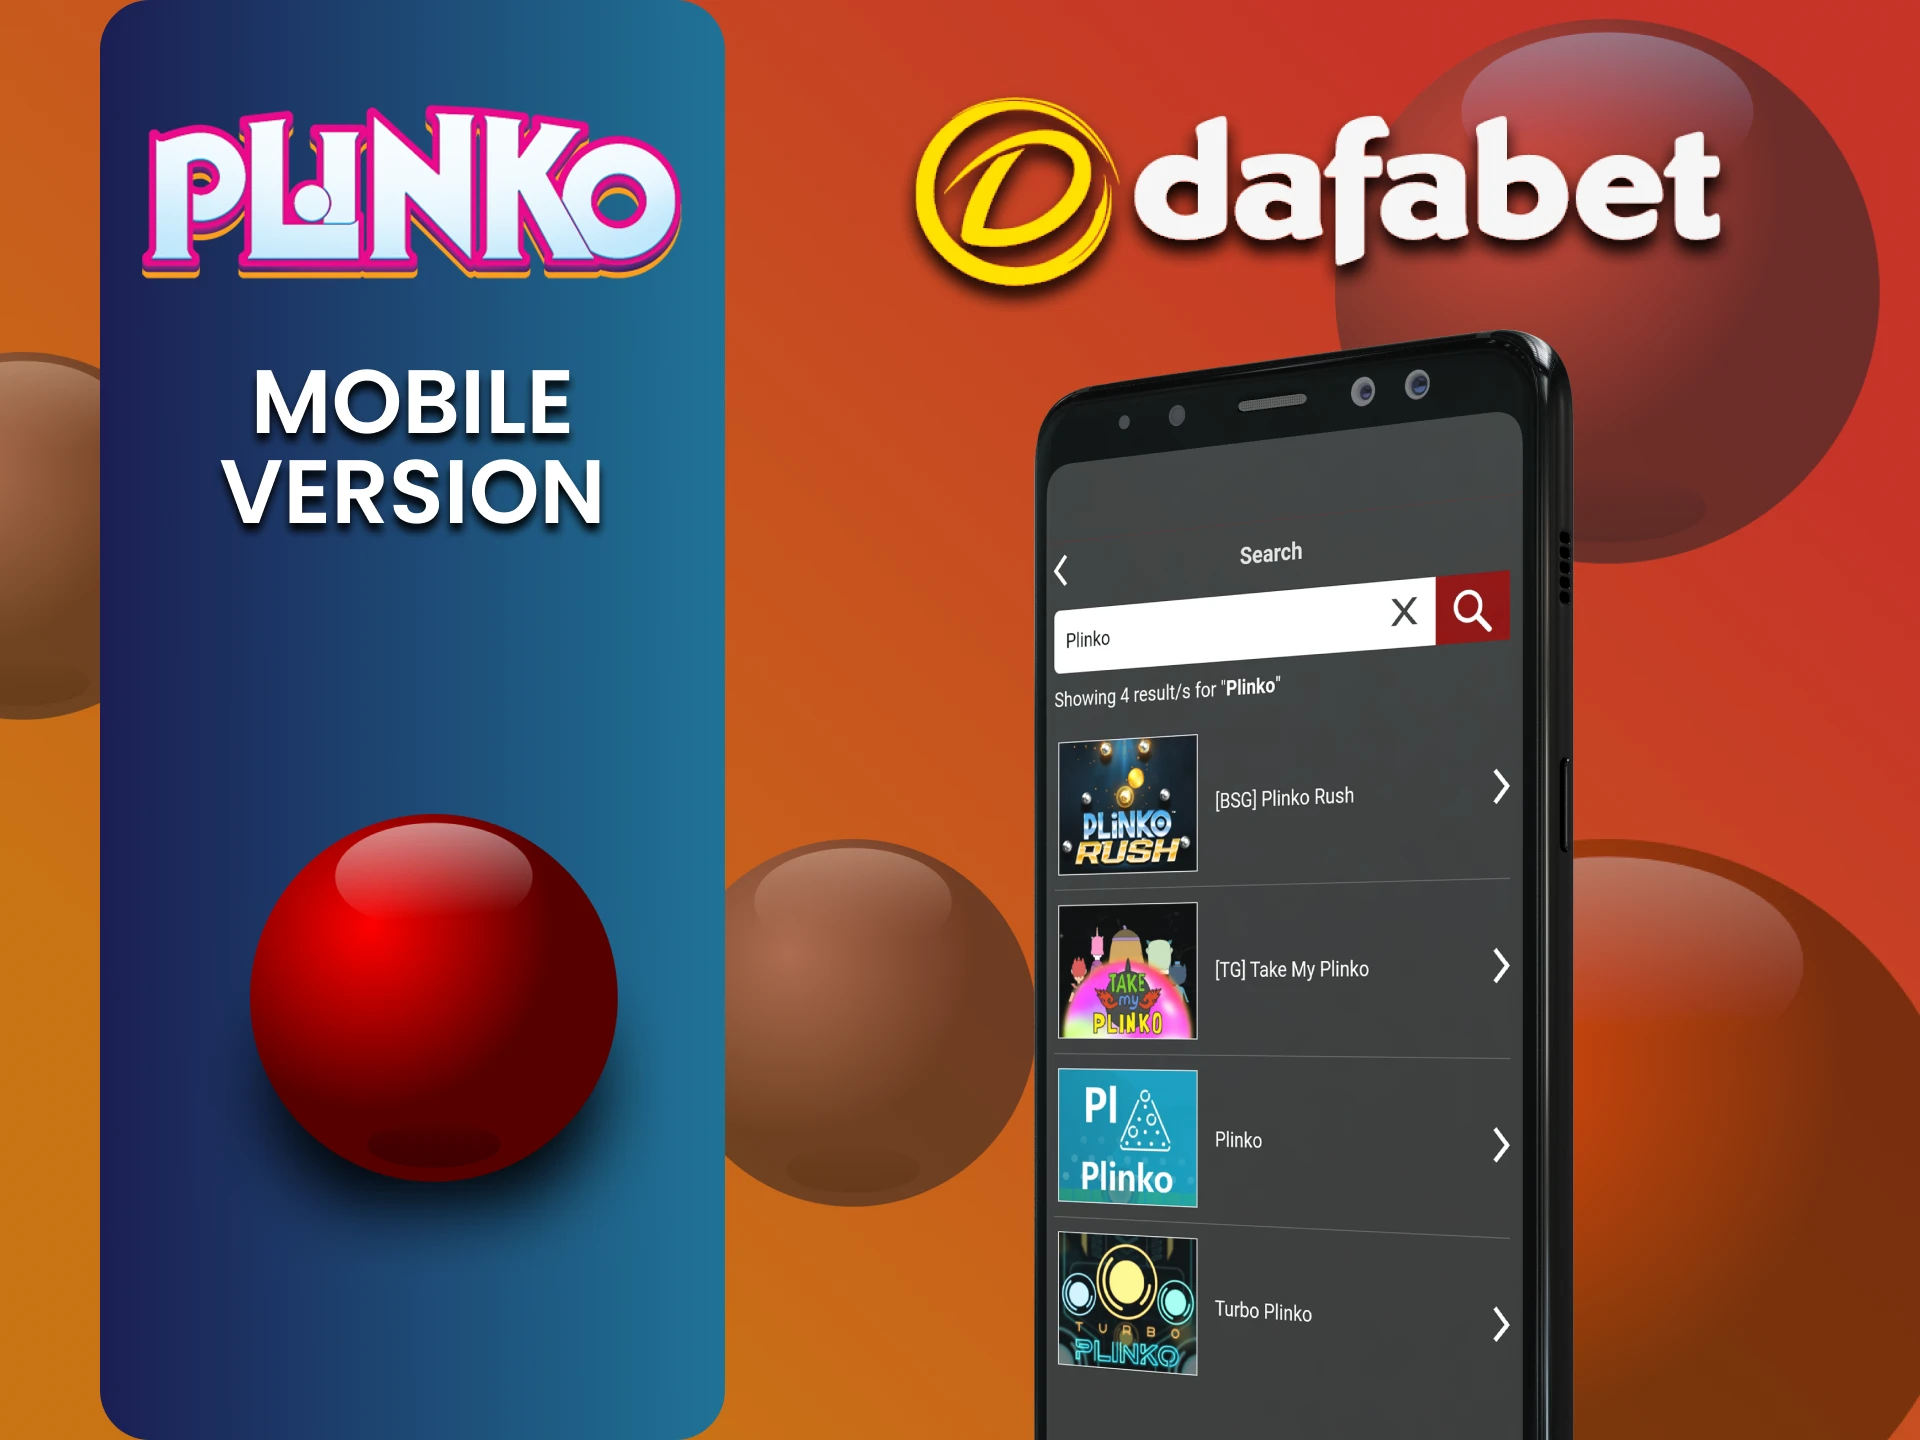 You can play Plinko on the Dafabet website via your phone.